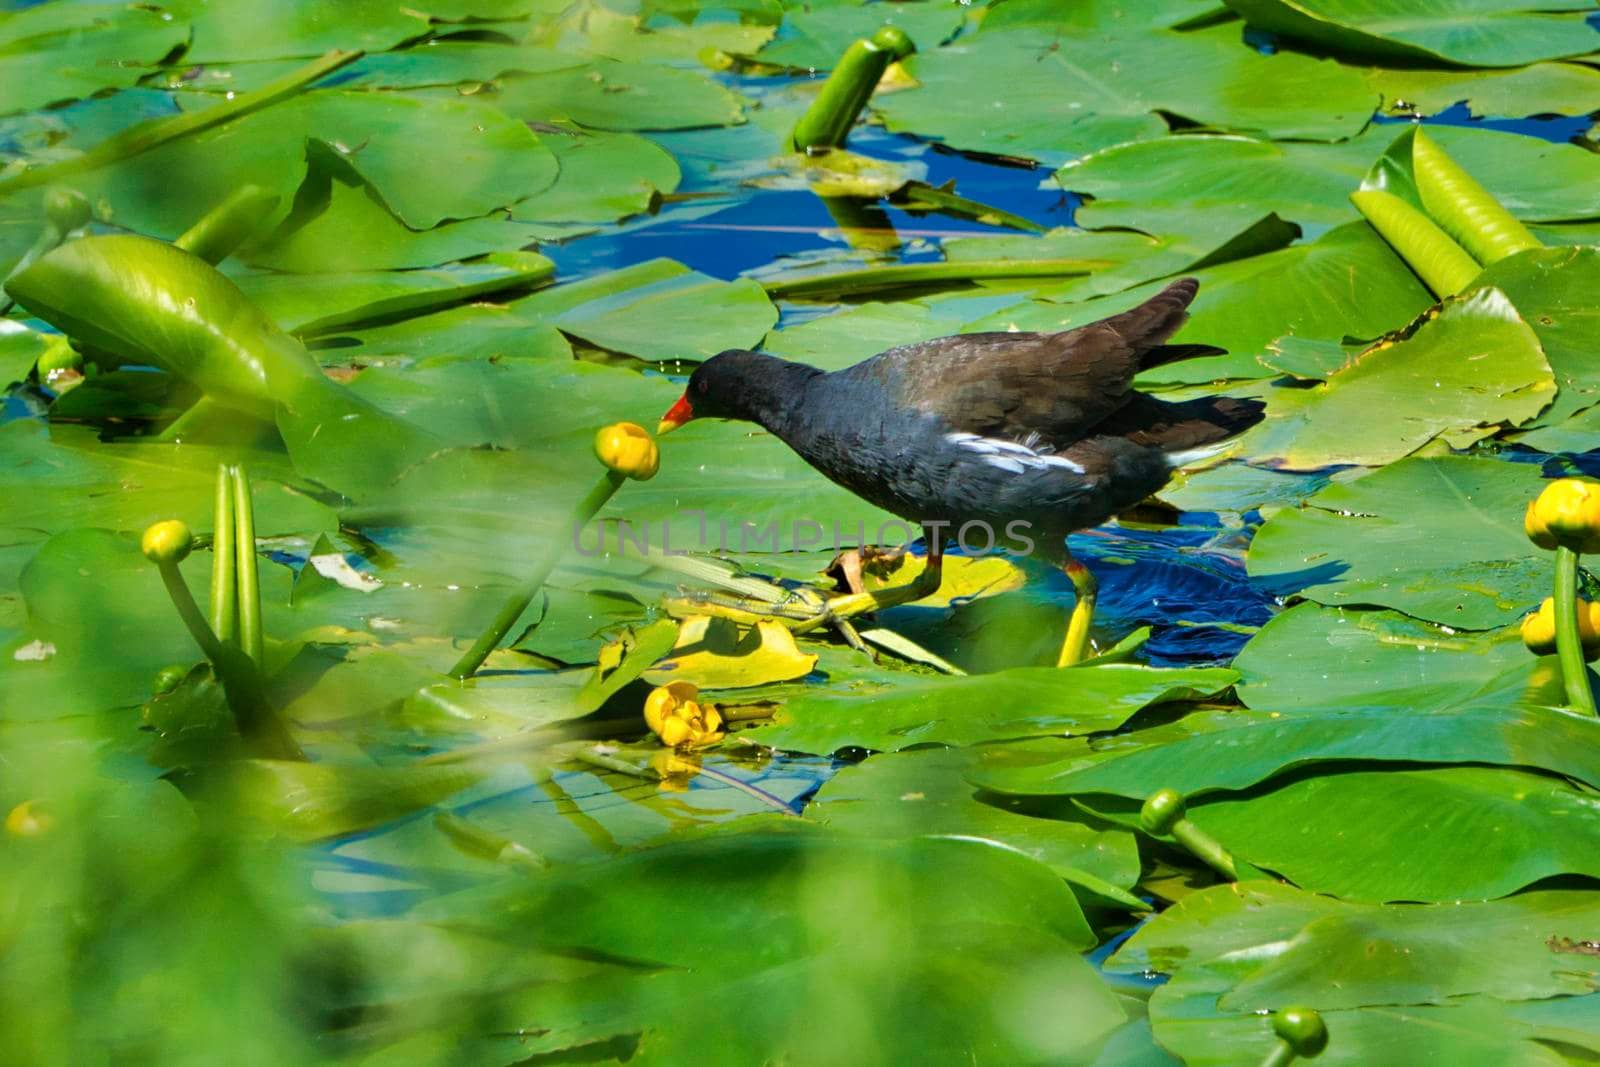 Eurasian Common Moorhen on a green water plant in Heligoland by Bullysoft